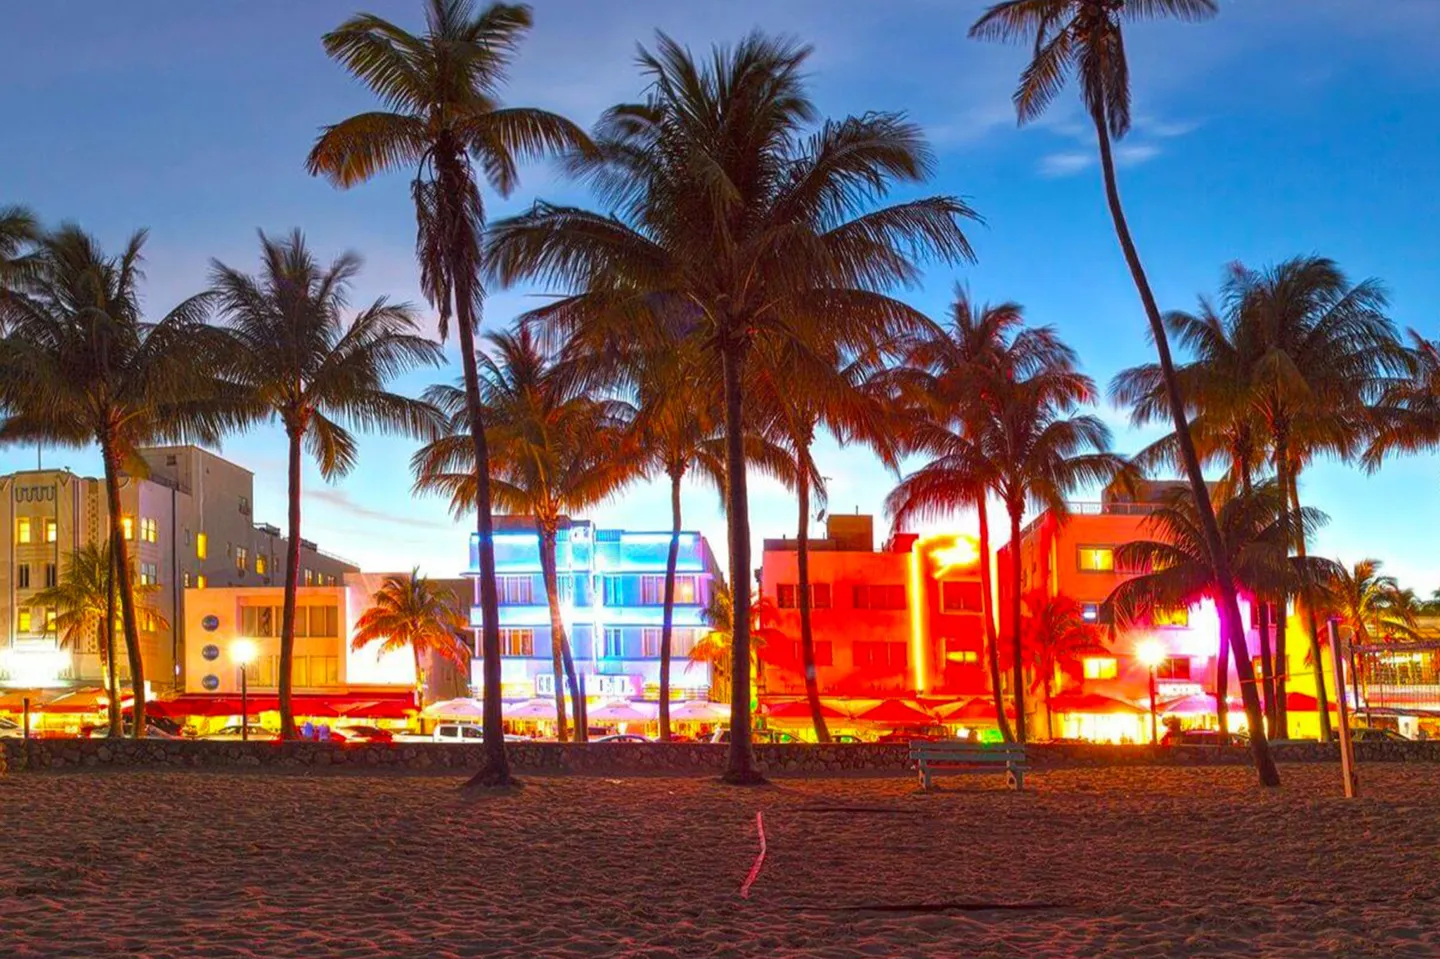 Spend a weekend in Miami, Florida for the exhilarating F1 Grand Prix